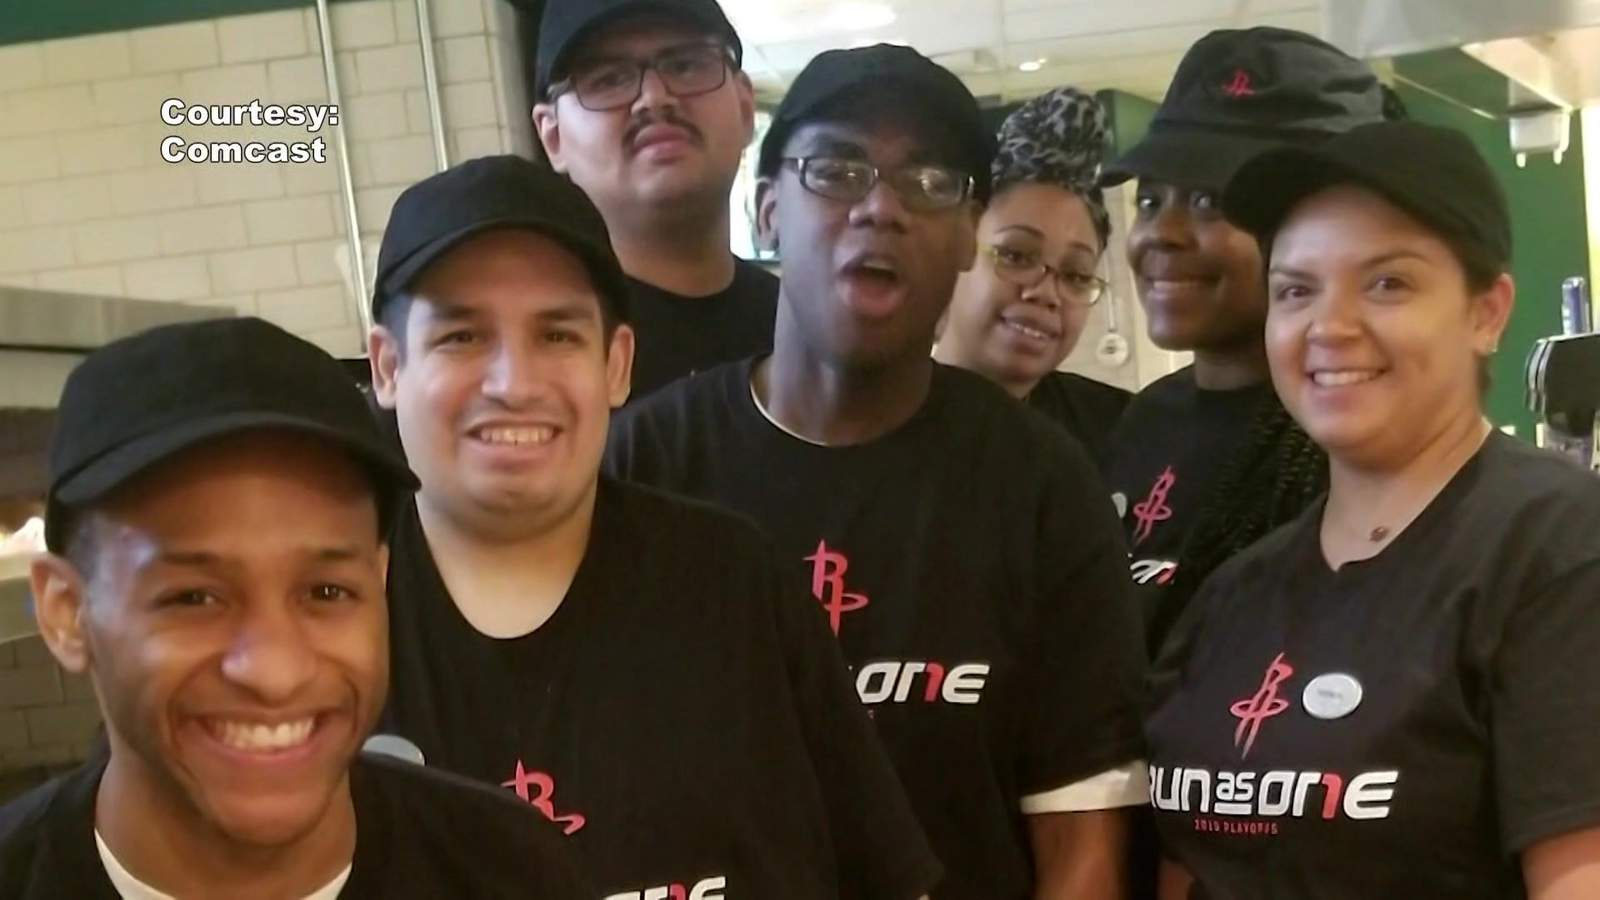 Voices of Houston: Non-profit teaches job training skills to adults living with autism